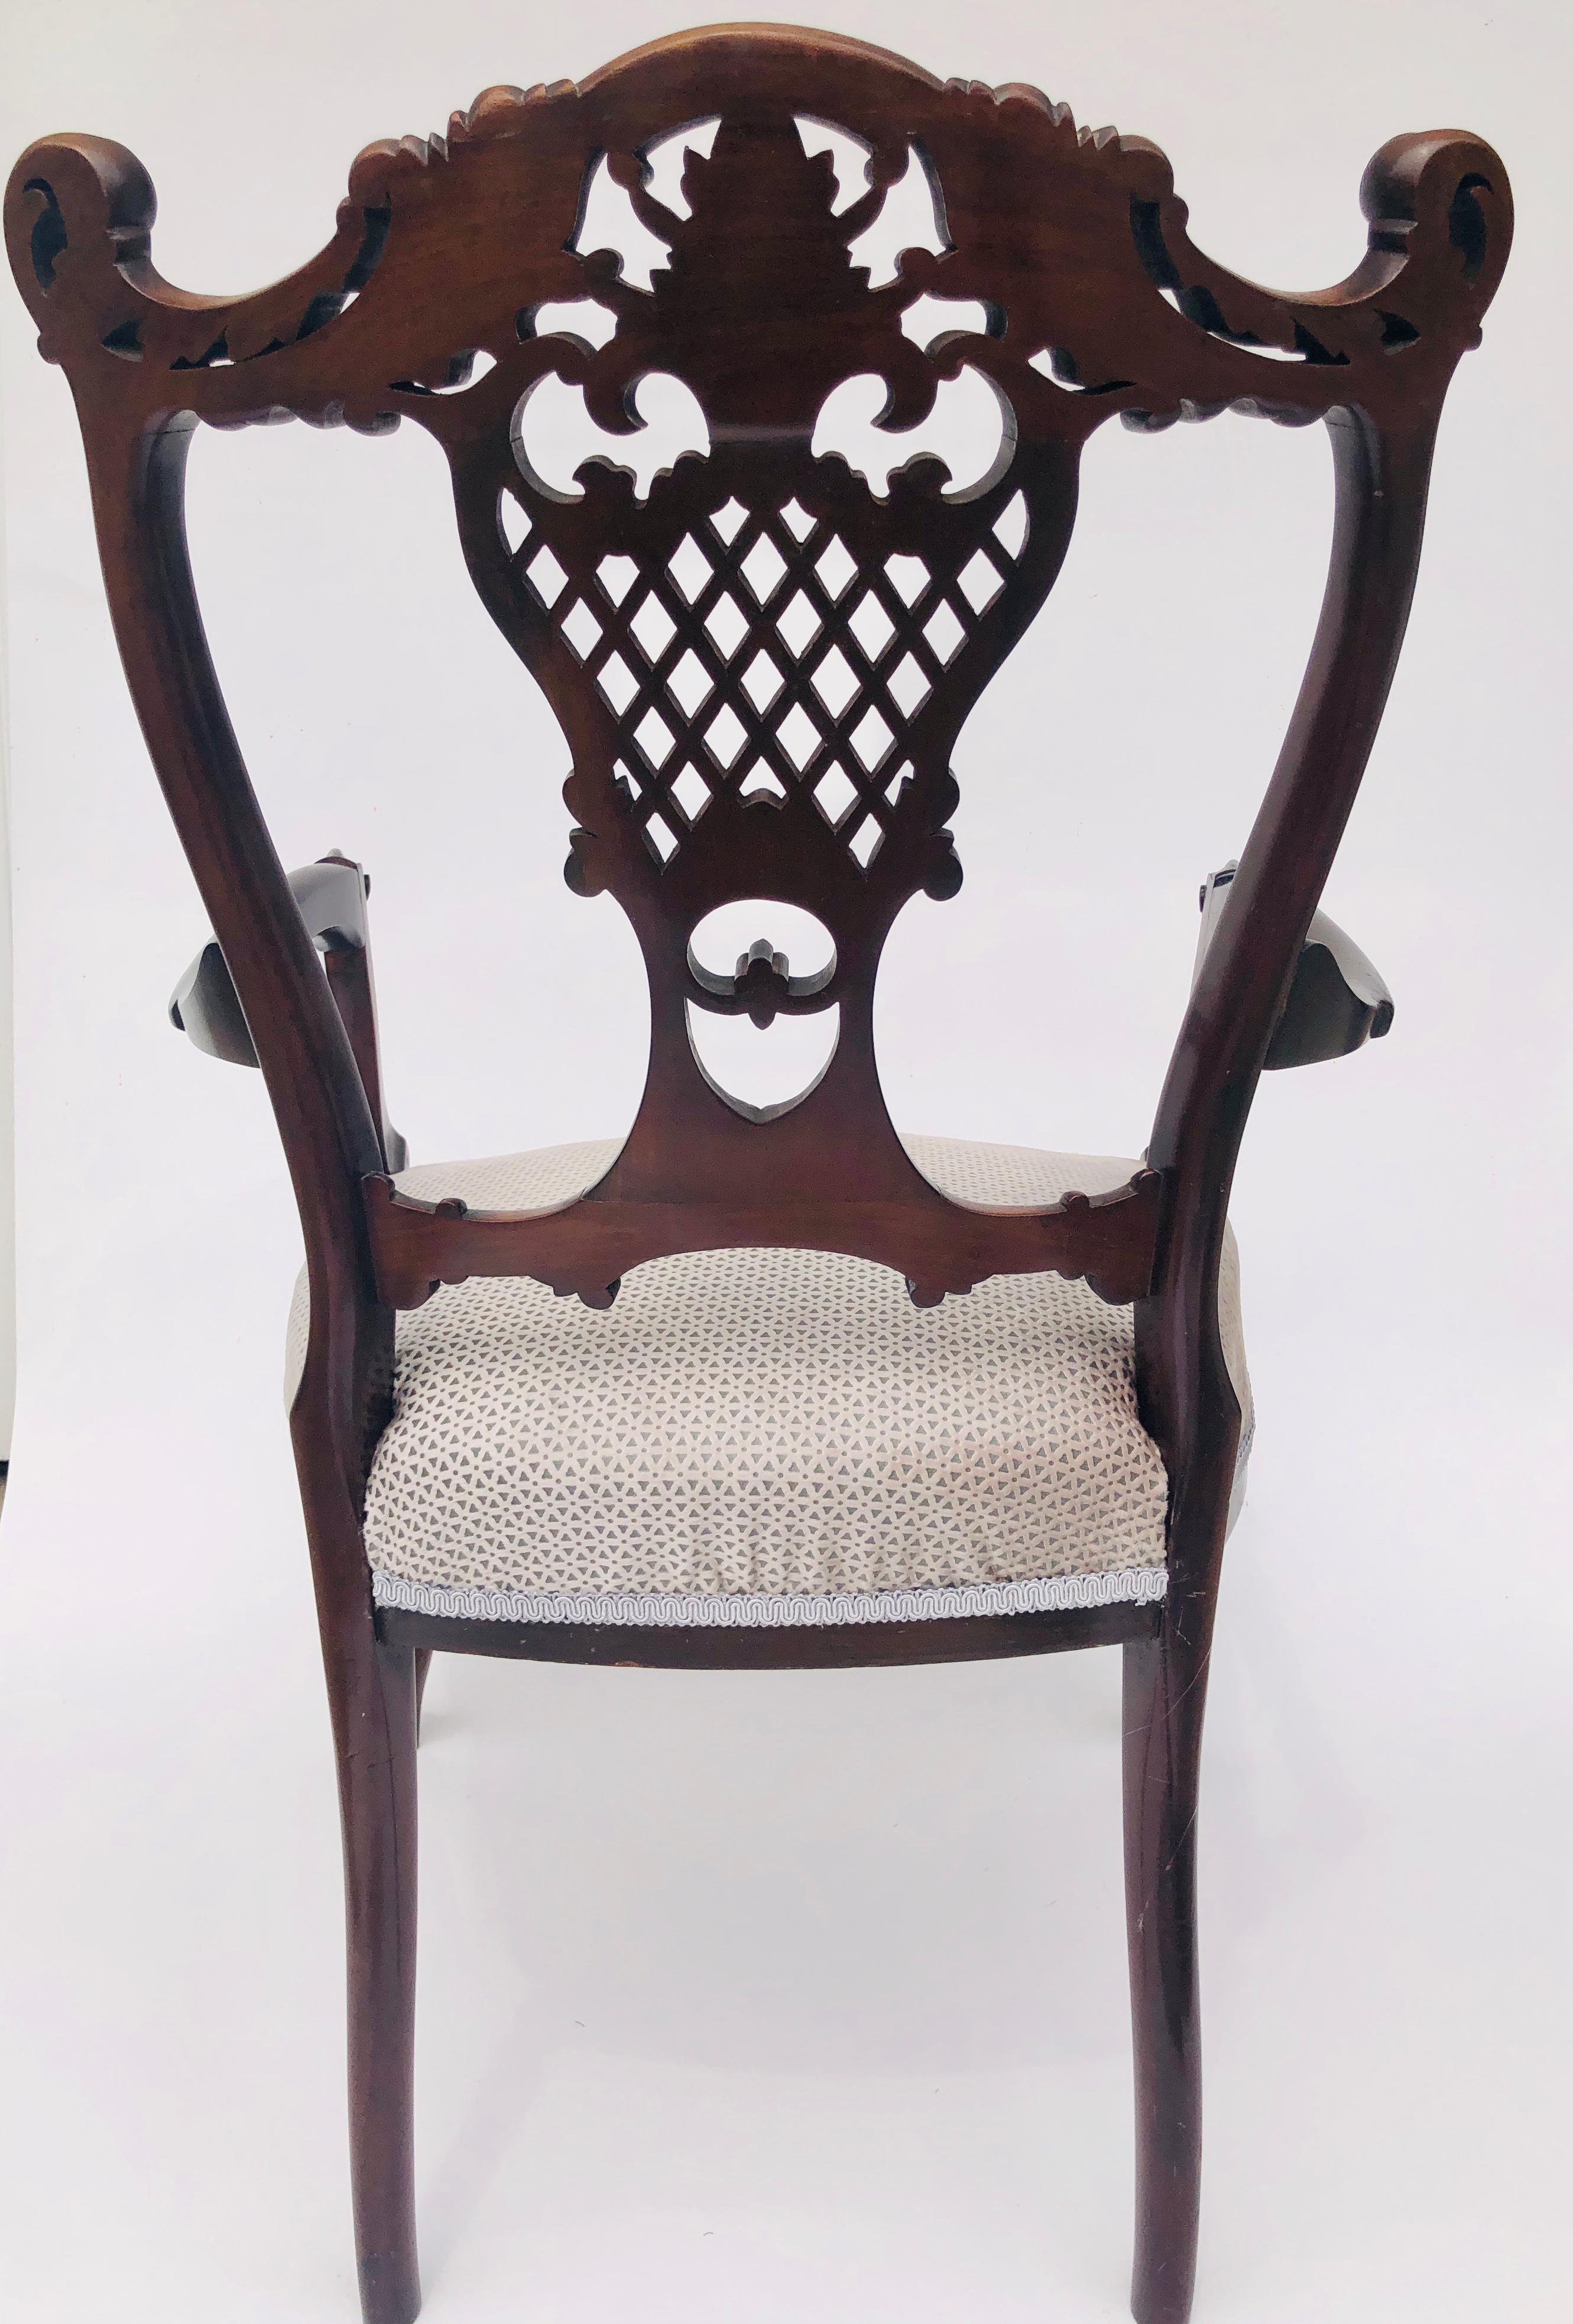 Fine quality antique 19th century Victorian mahogany carved armchair having a beautiful carved pierced shaped back. Shaped carved open arms, standing on carved cabriole feet and outswept back legs. Newly upholstered in a quality grey fabric.

A